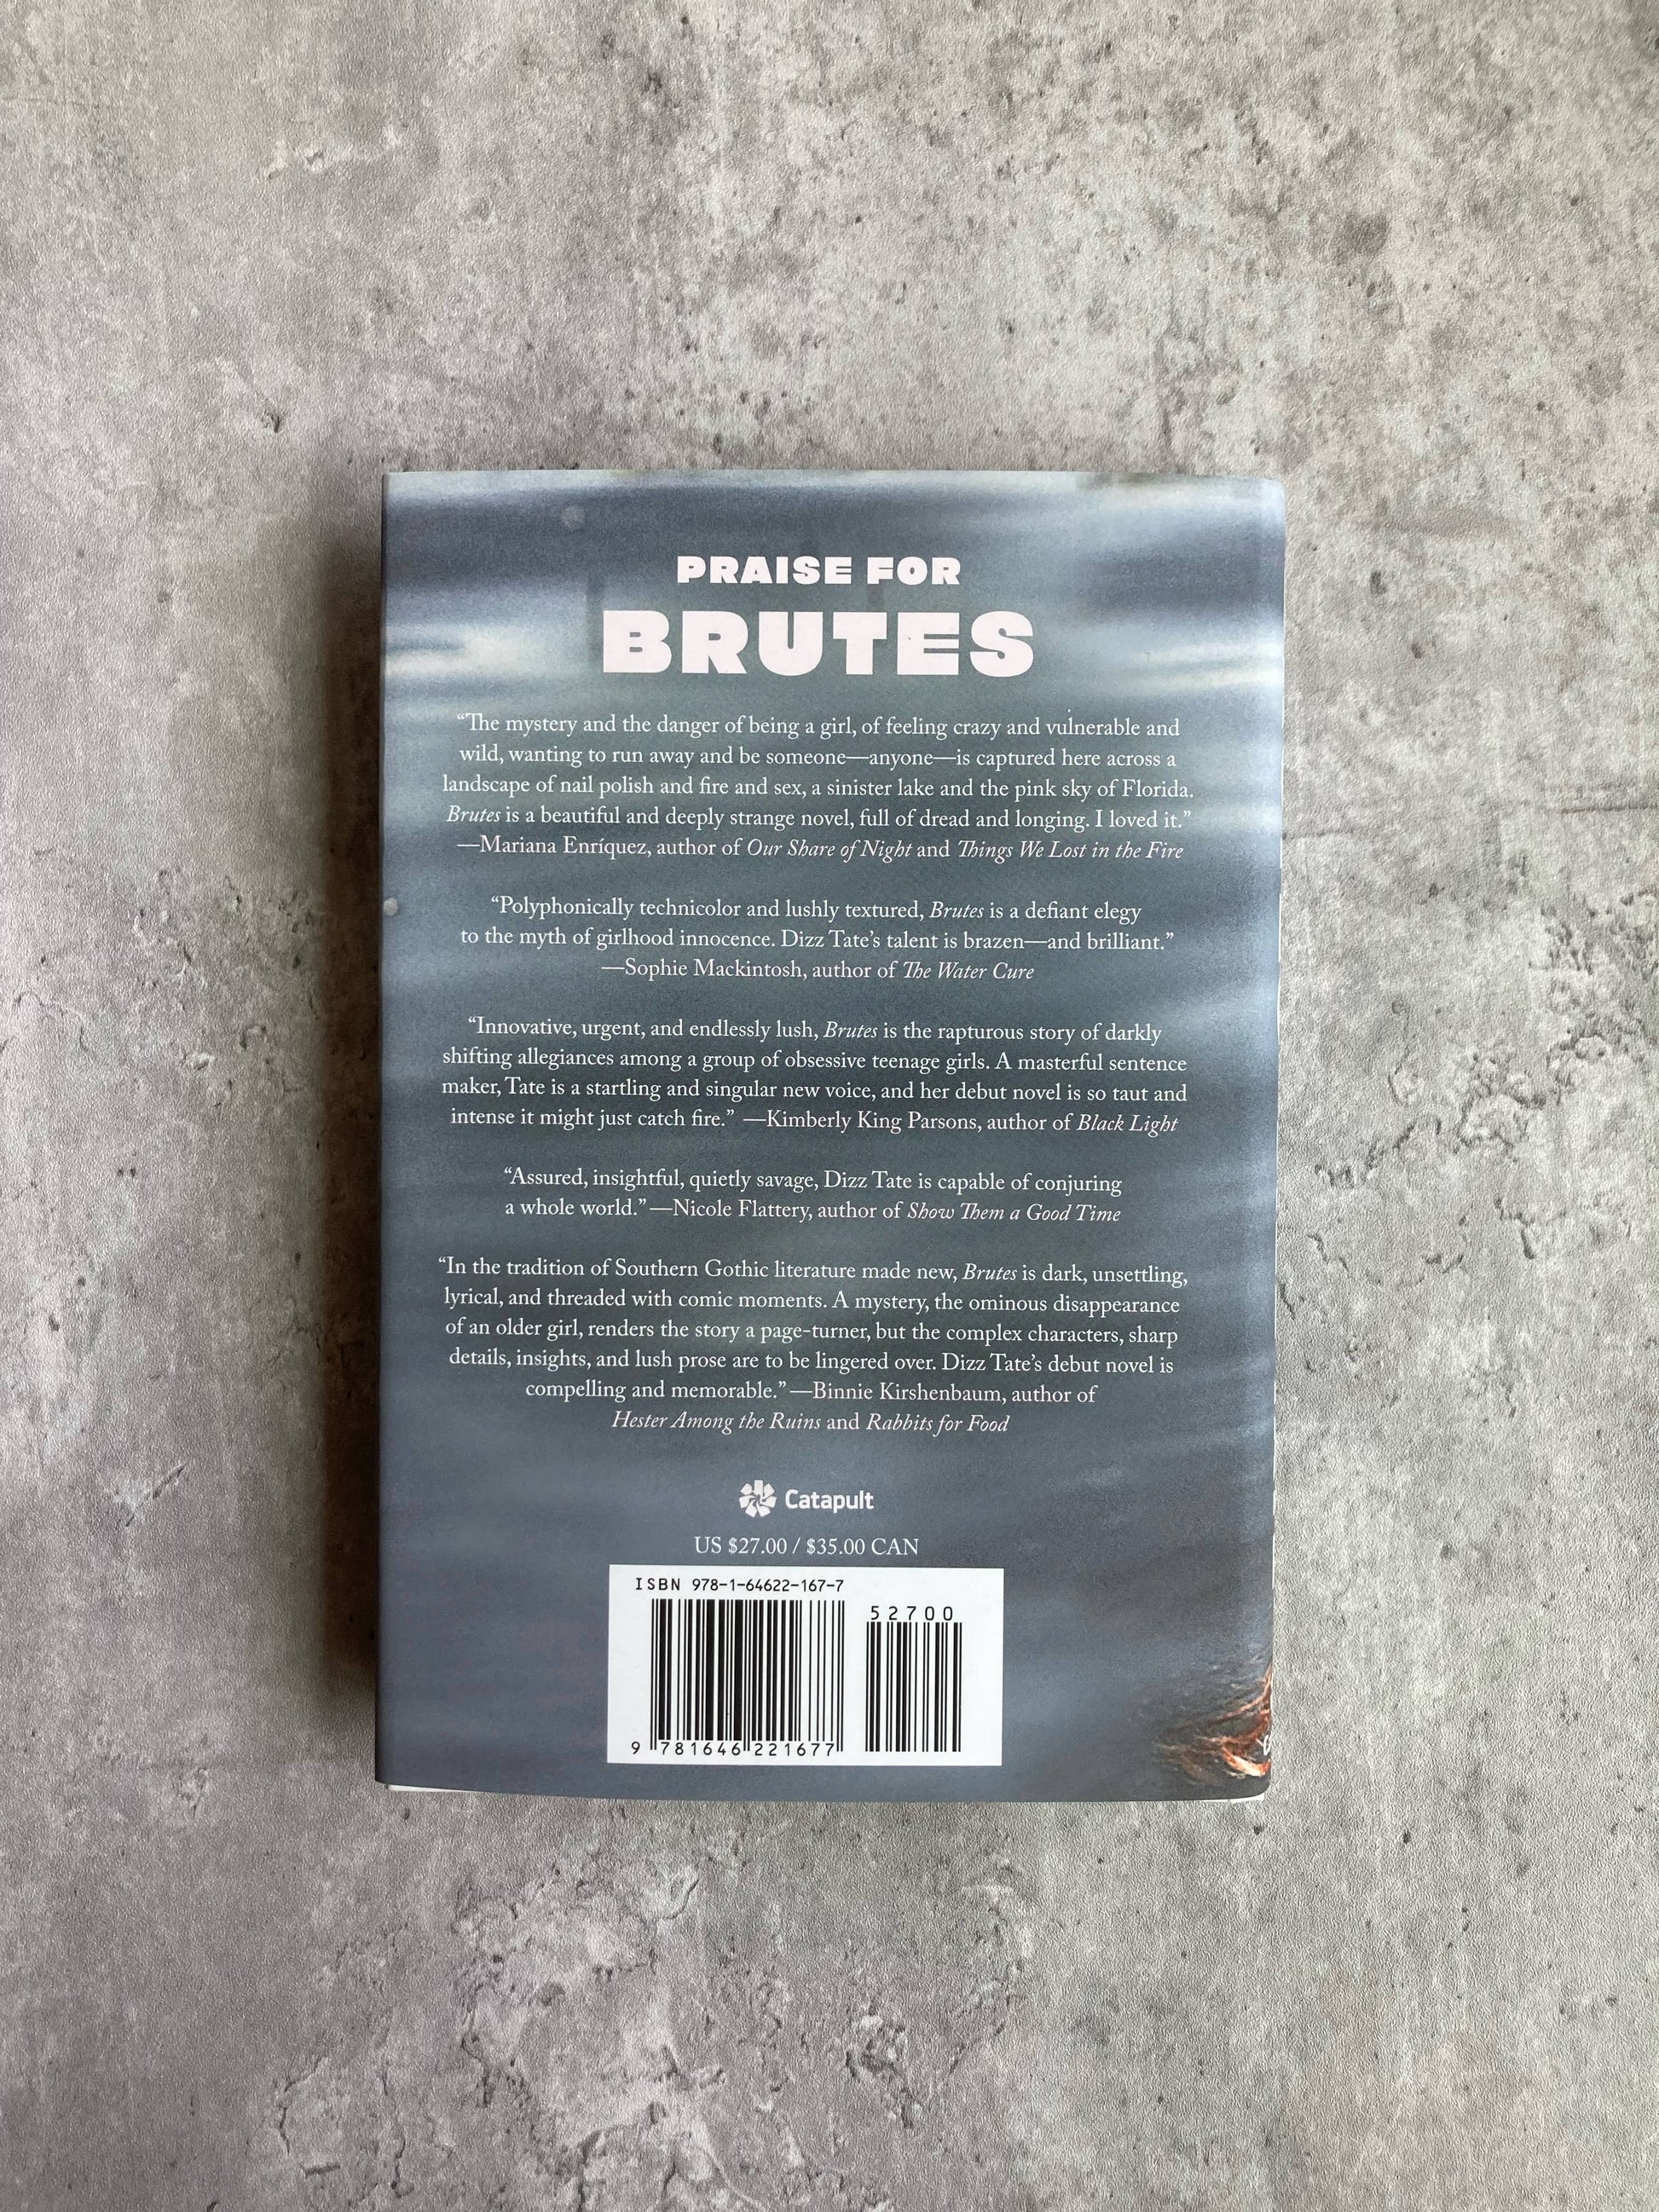 Cover of Brutes book by Dizz Tate. Shop all new and used books at The Stone Circle, online bookstore in Los Angeles, California. 